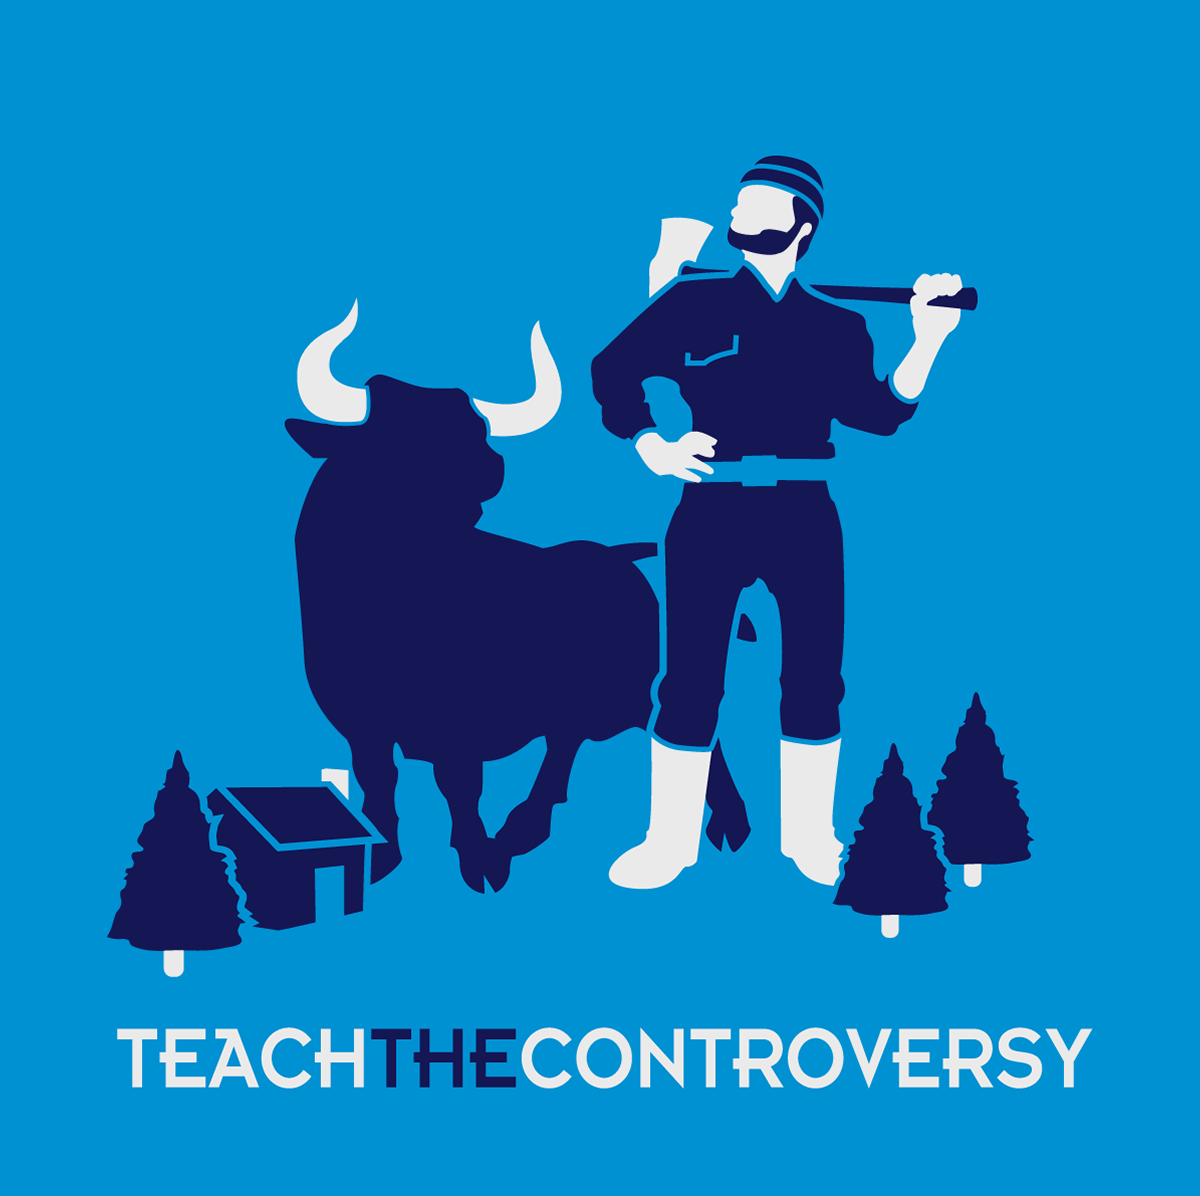 Paul Bunyan shirt from Teach the Controversy